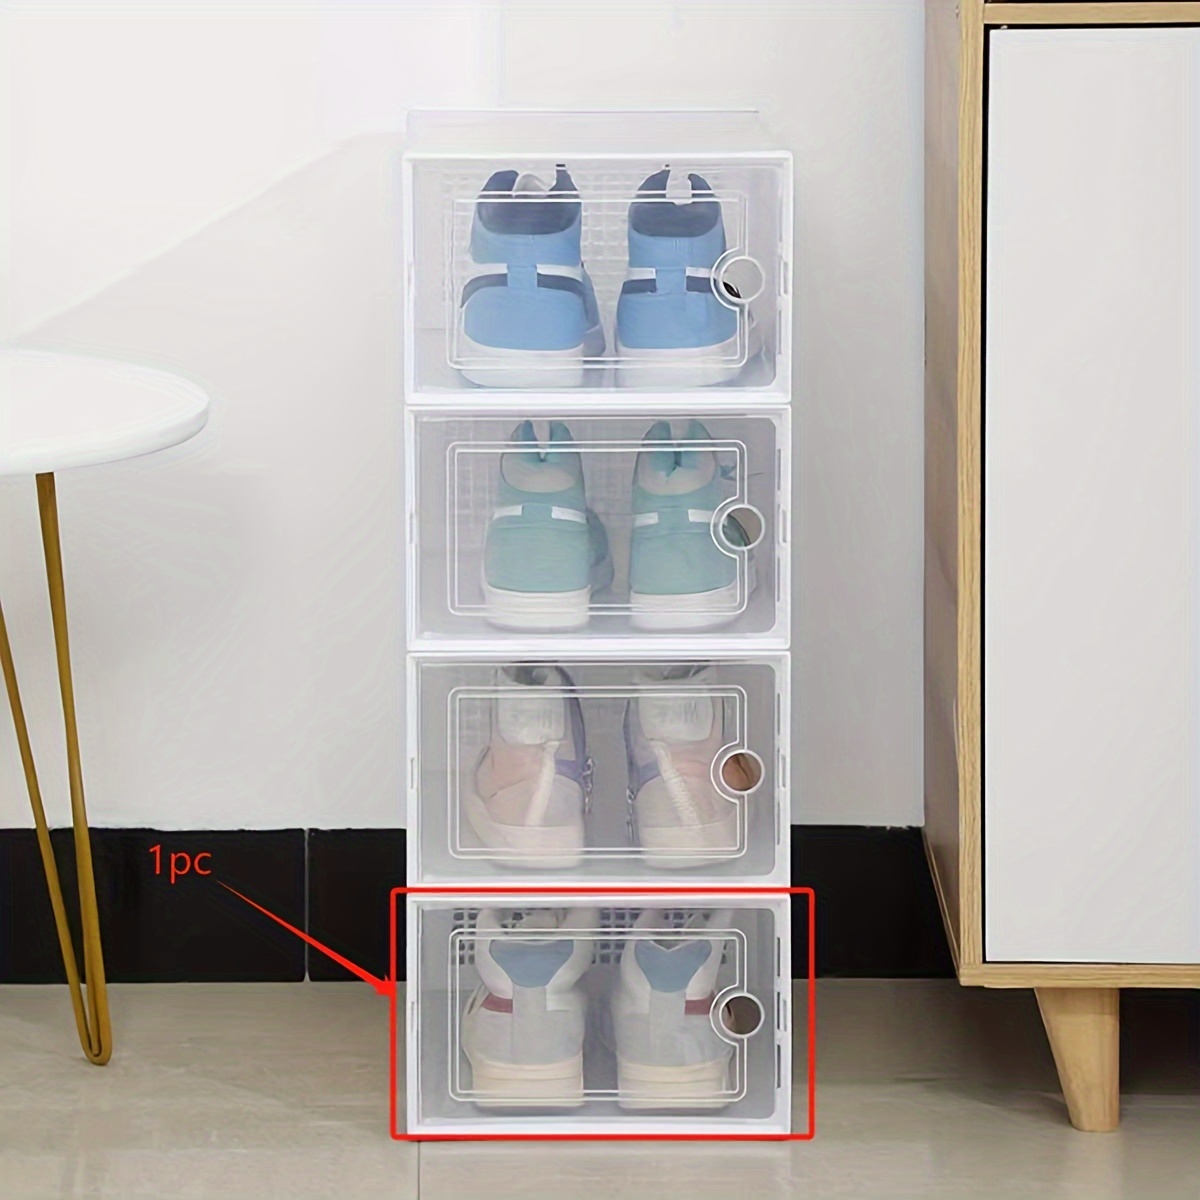 

1pc Magnetic Closure Shoe Box - Dustproof & Moisture-resistant, Transparent Pp Plastic, Stackable Storage Organizer With Side Door For Home Use